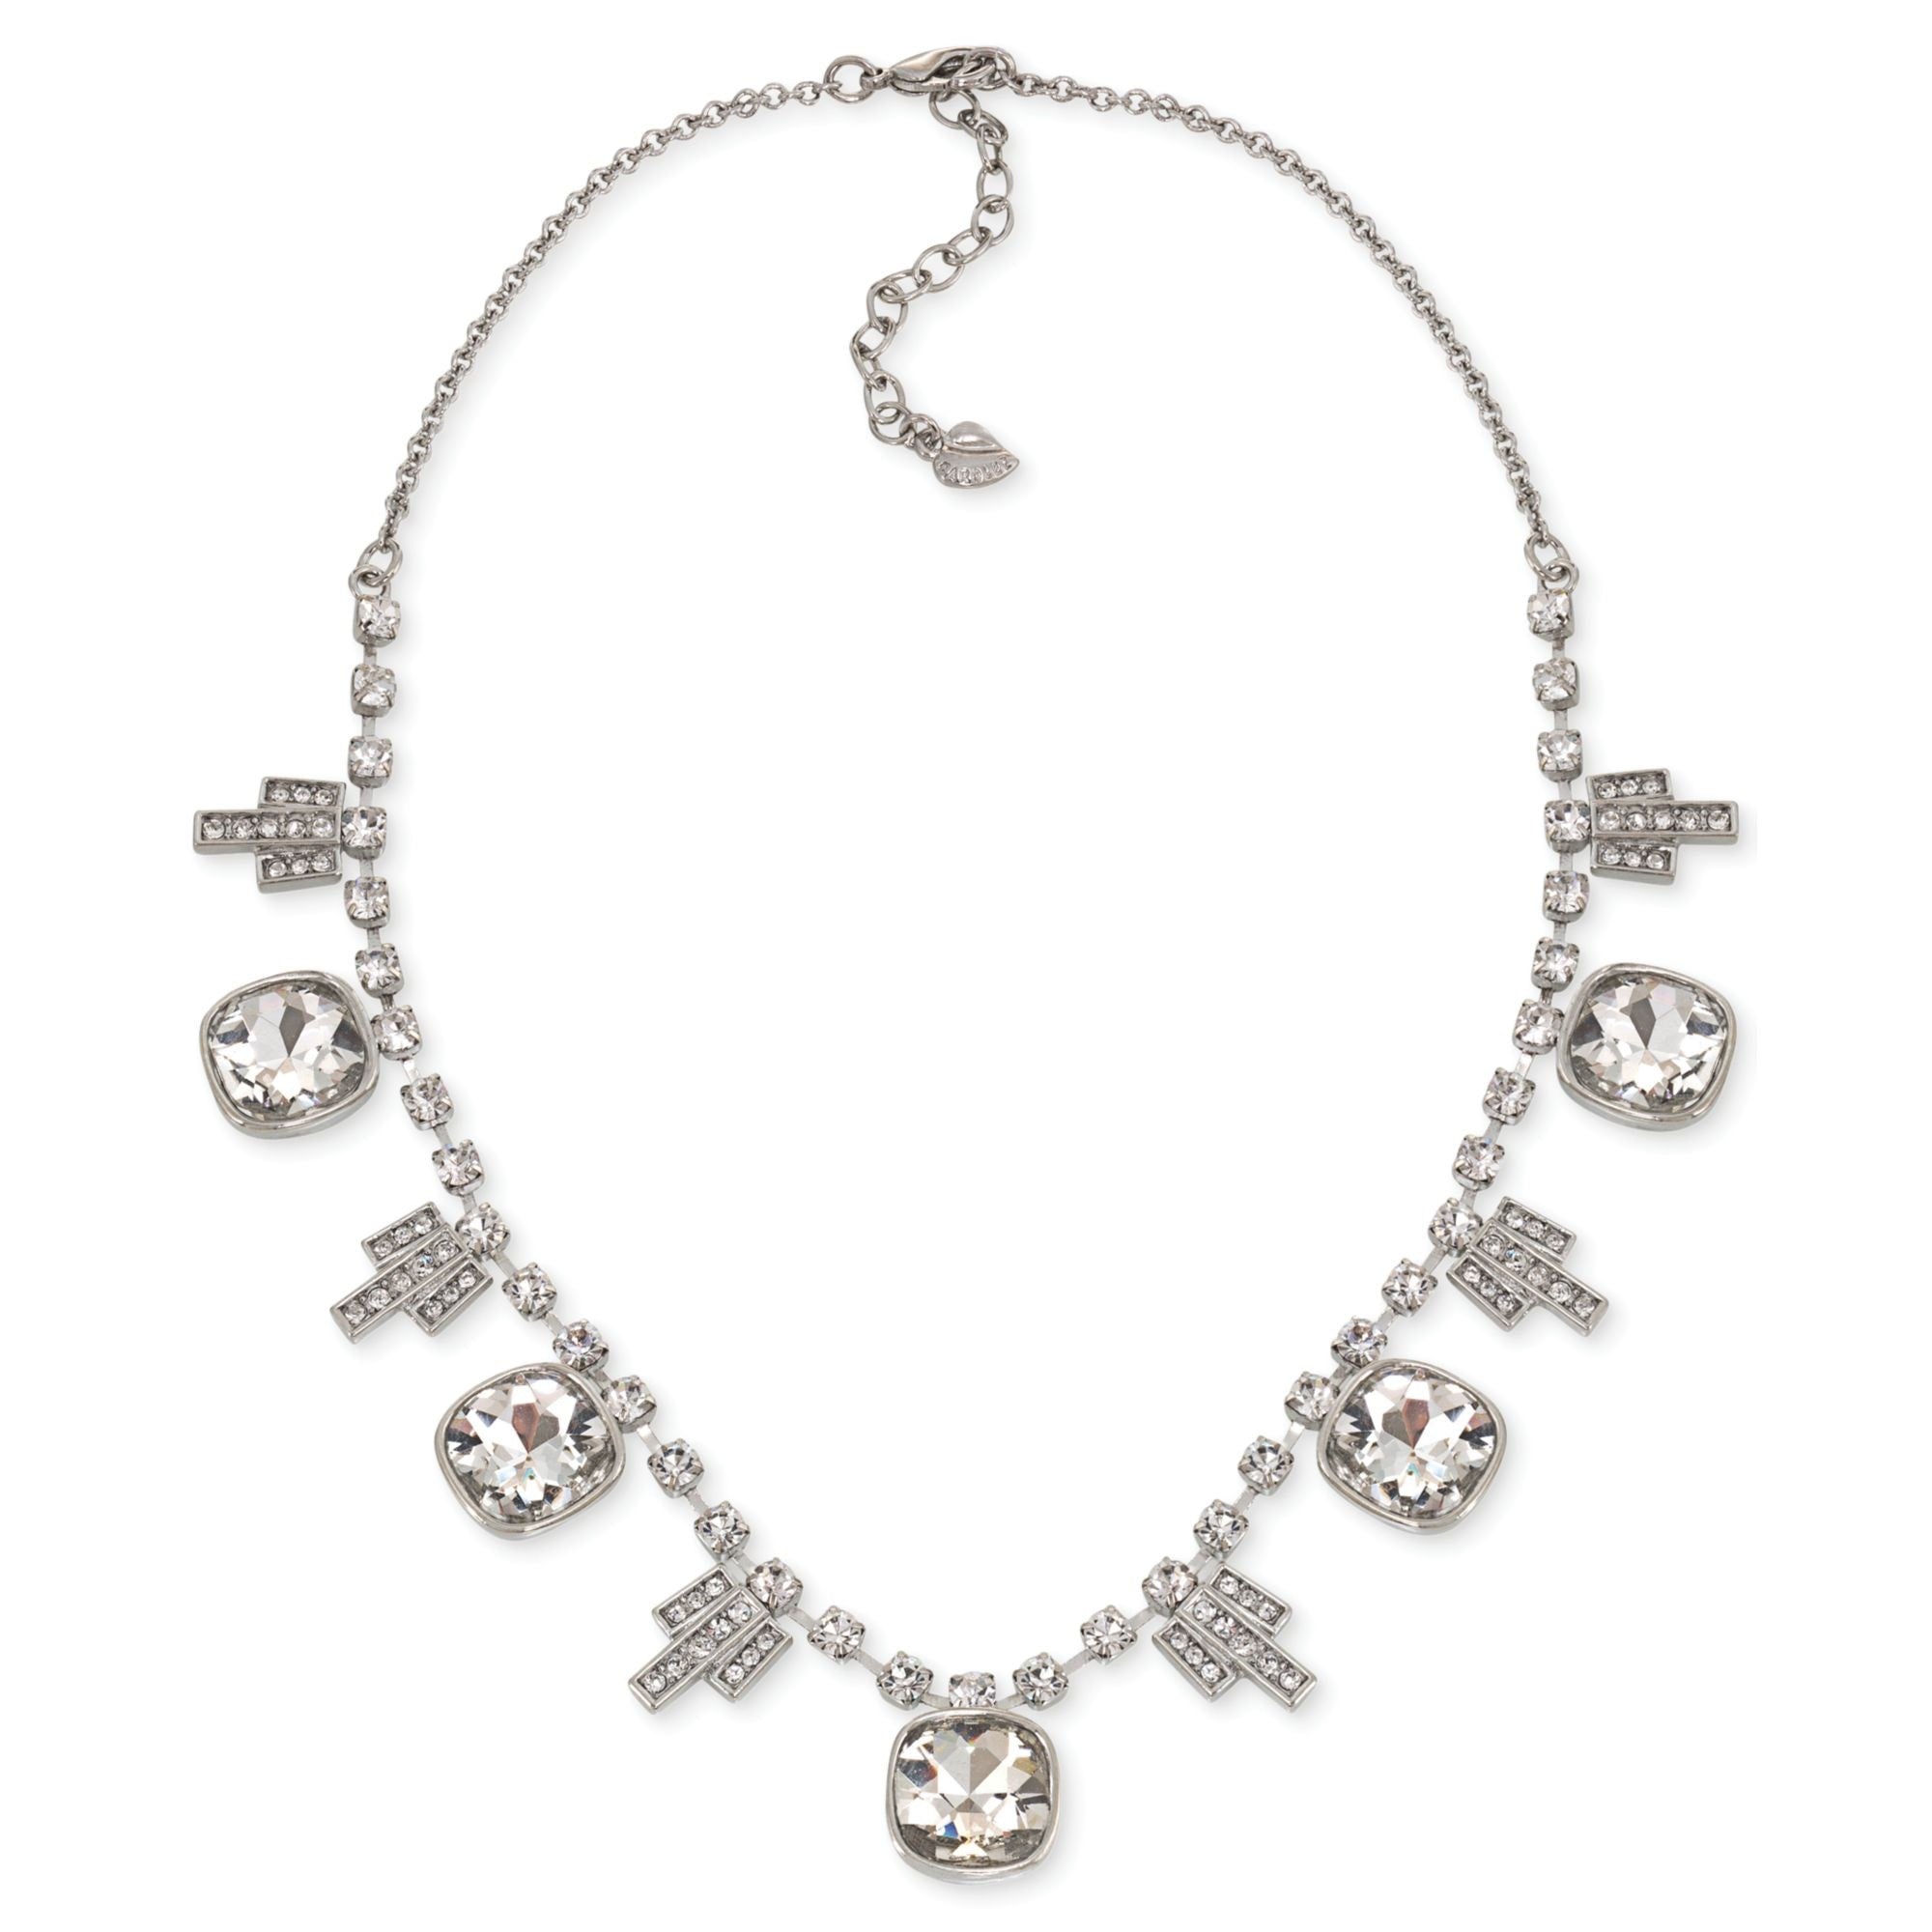 Create a sparkling statement with this deco style frontal necklace for any special occasion